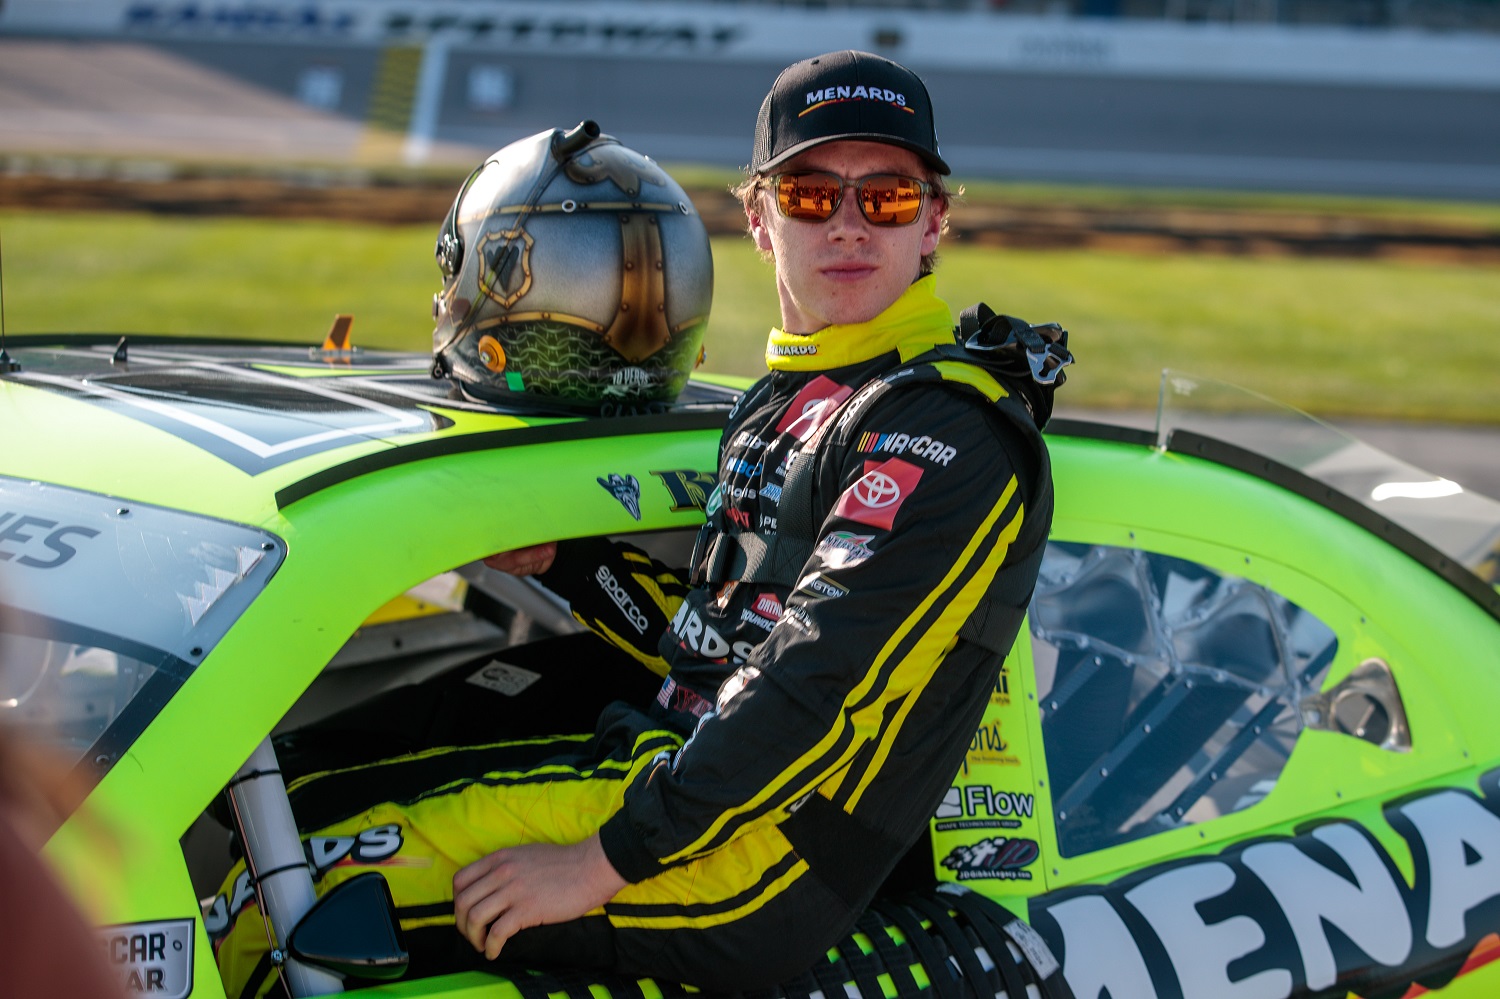 Brandon Jones sits in his car after qualifying for the NASCAR Xfinity Series Kansas Lottery 300 race on Sept. 9, 2022 at Kansas Speedway in Kansas City, Kansas. | William Purnell/Icon Sportswire via Getty Images